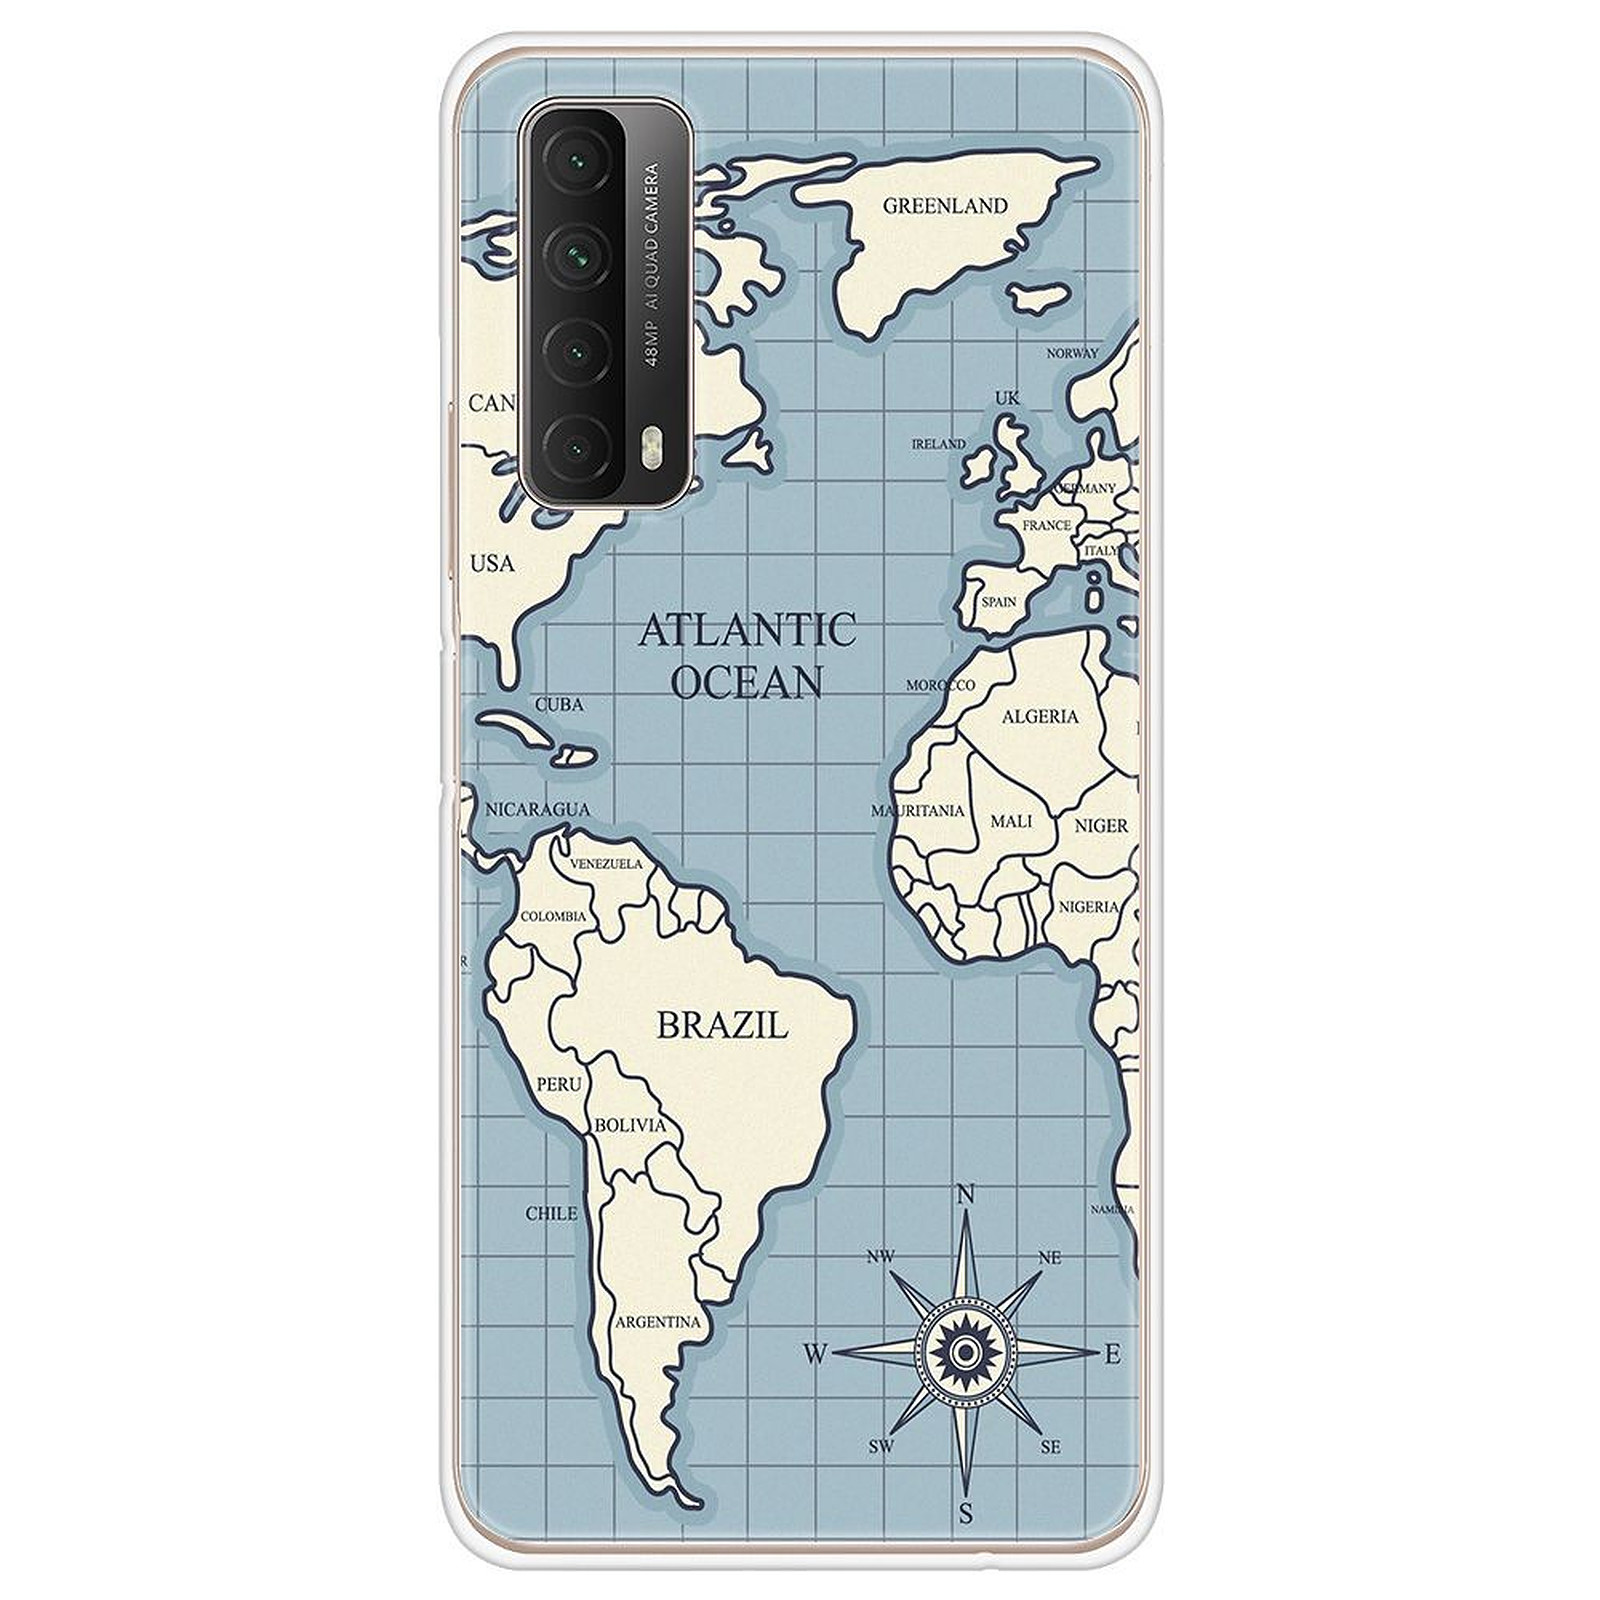 1001 Coques Coque silicone gel Huawei P Smart 2021 motif Map vintage - Coque telephone 1001Coques